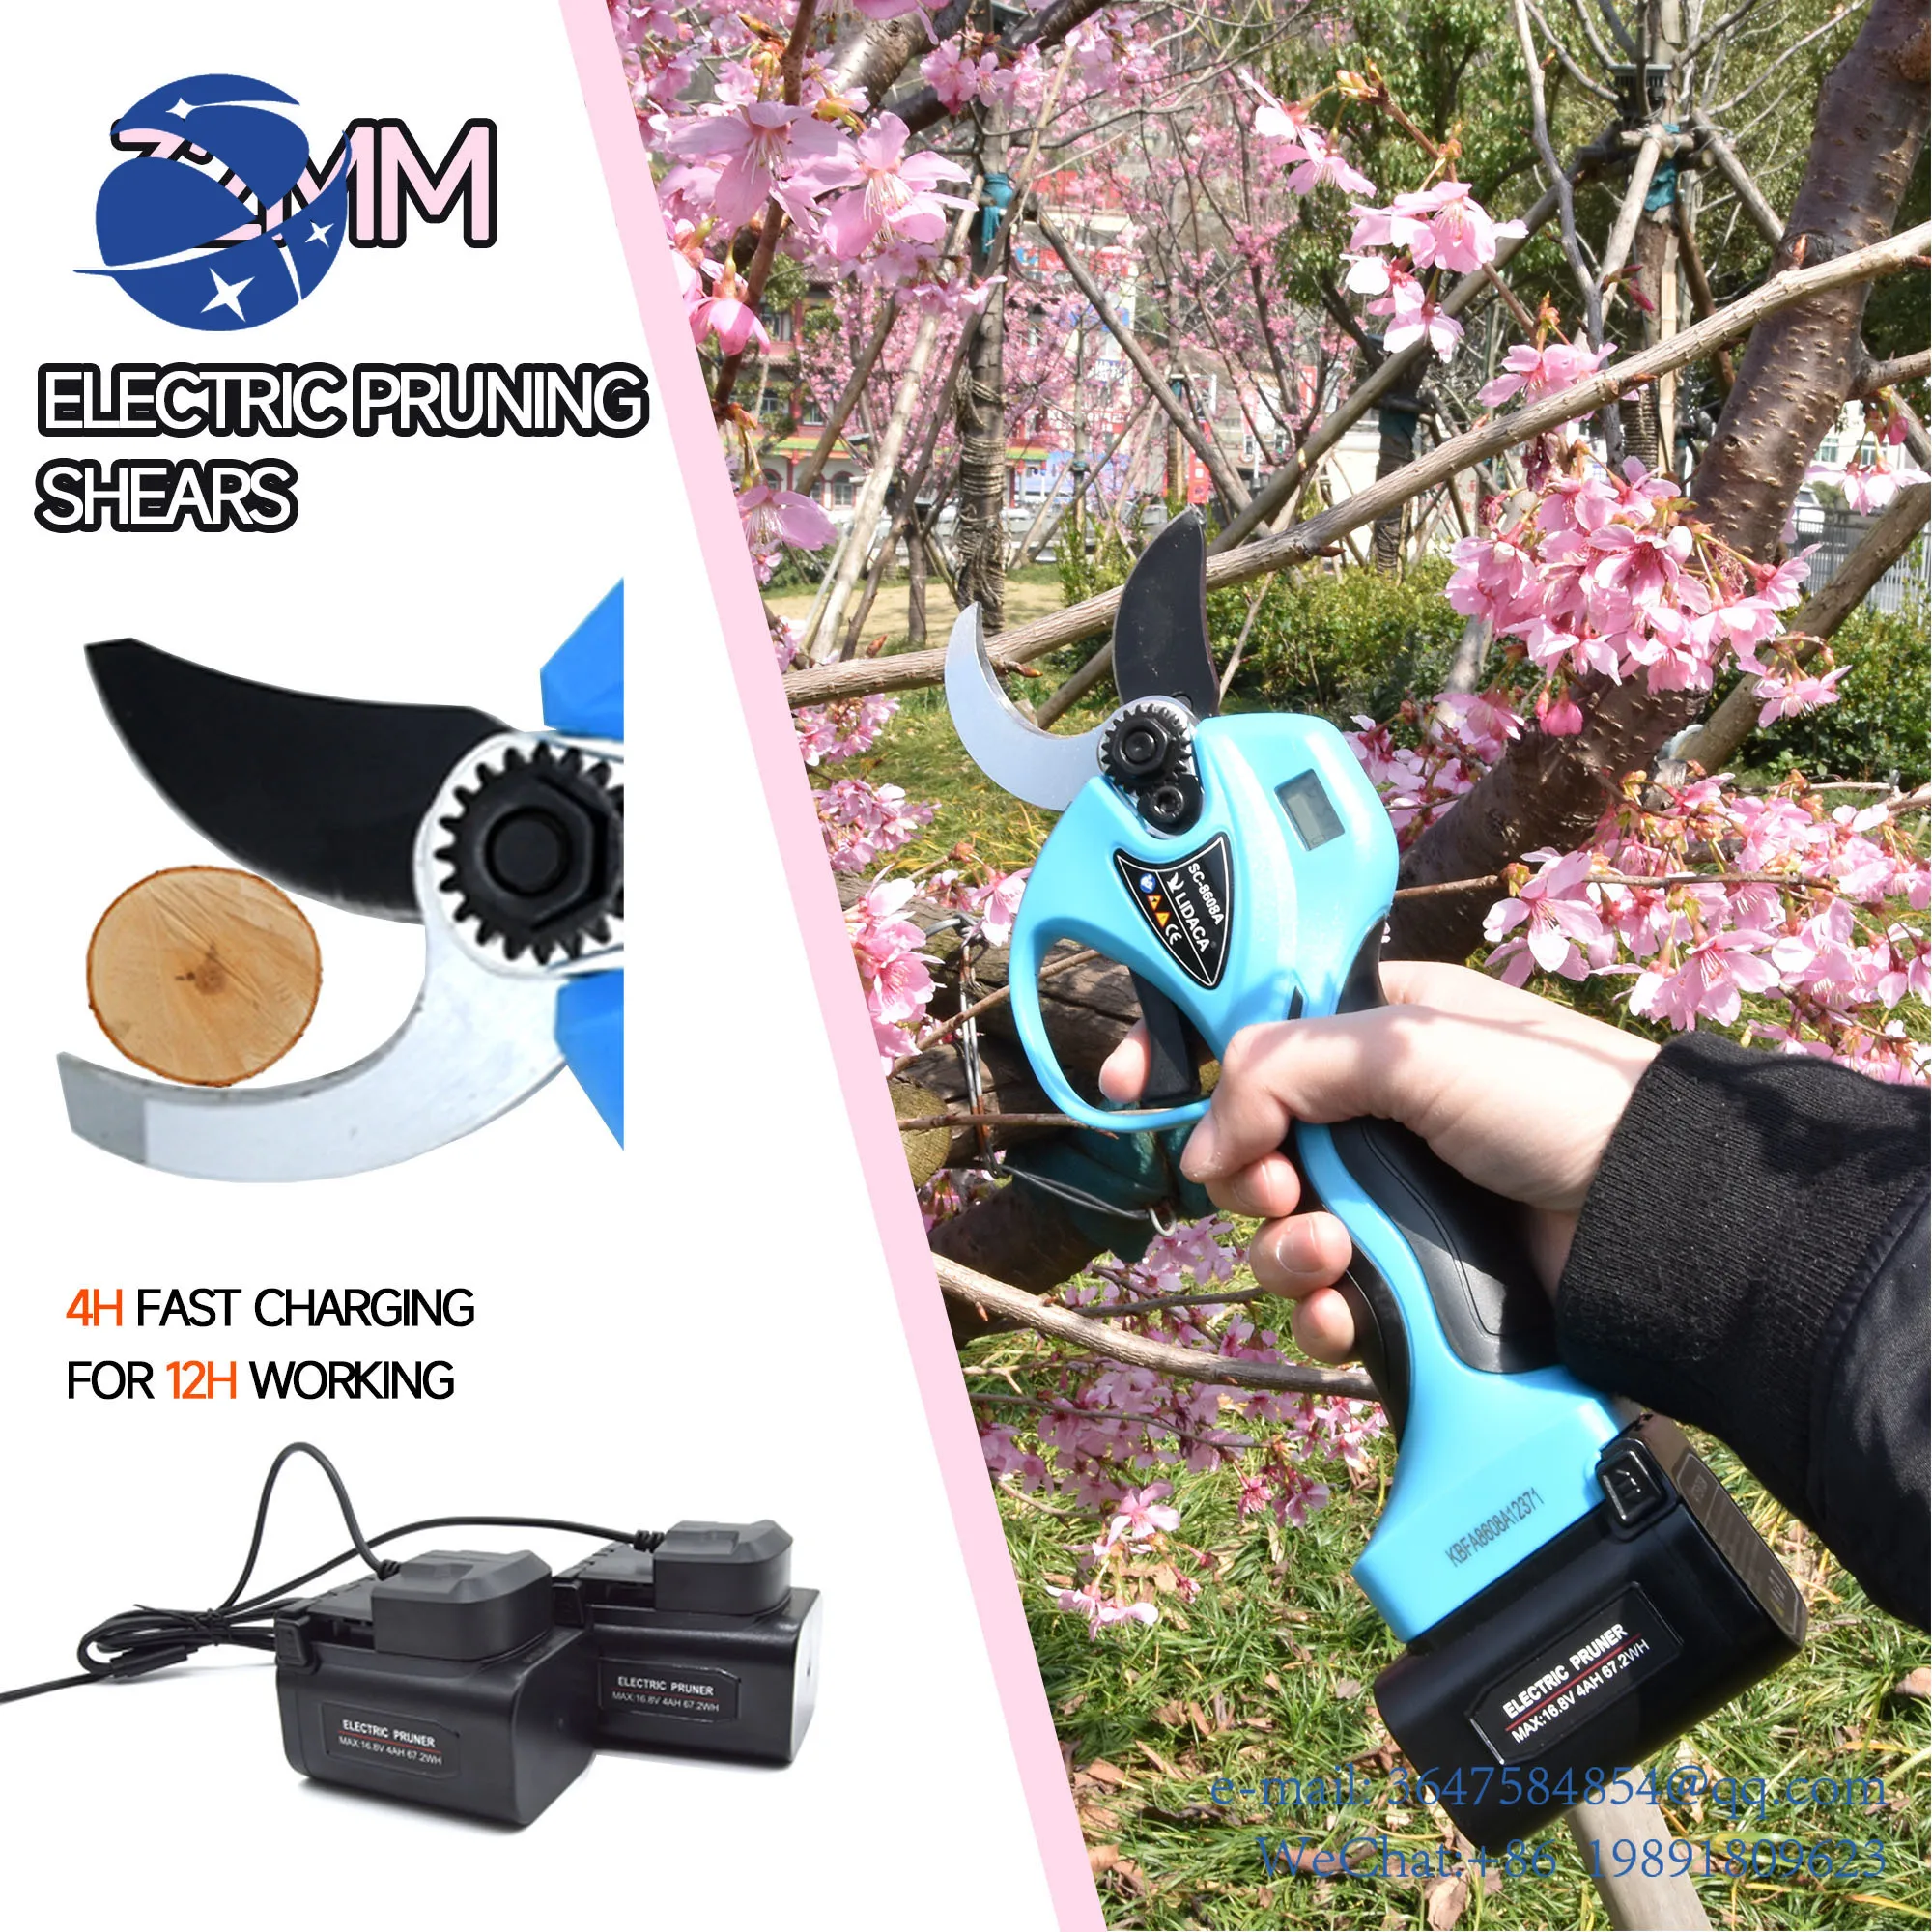 

Yunyi16.8V Cordless Pruner Lithium-ion Pruning Shear Efficient scissors Bonsai Electric Tree Branches garden tools electric SC-8